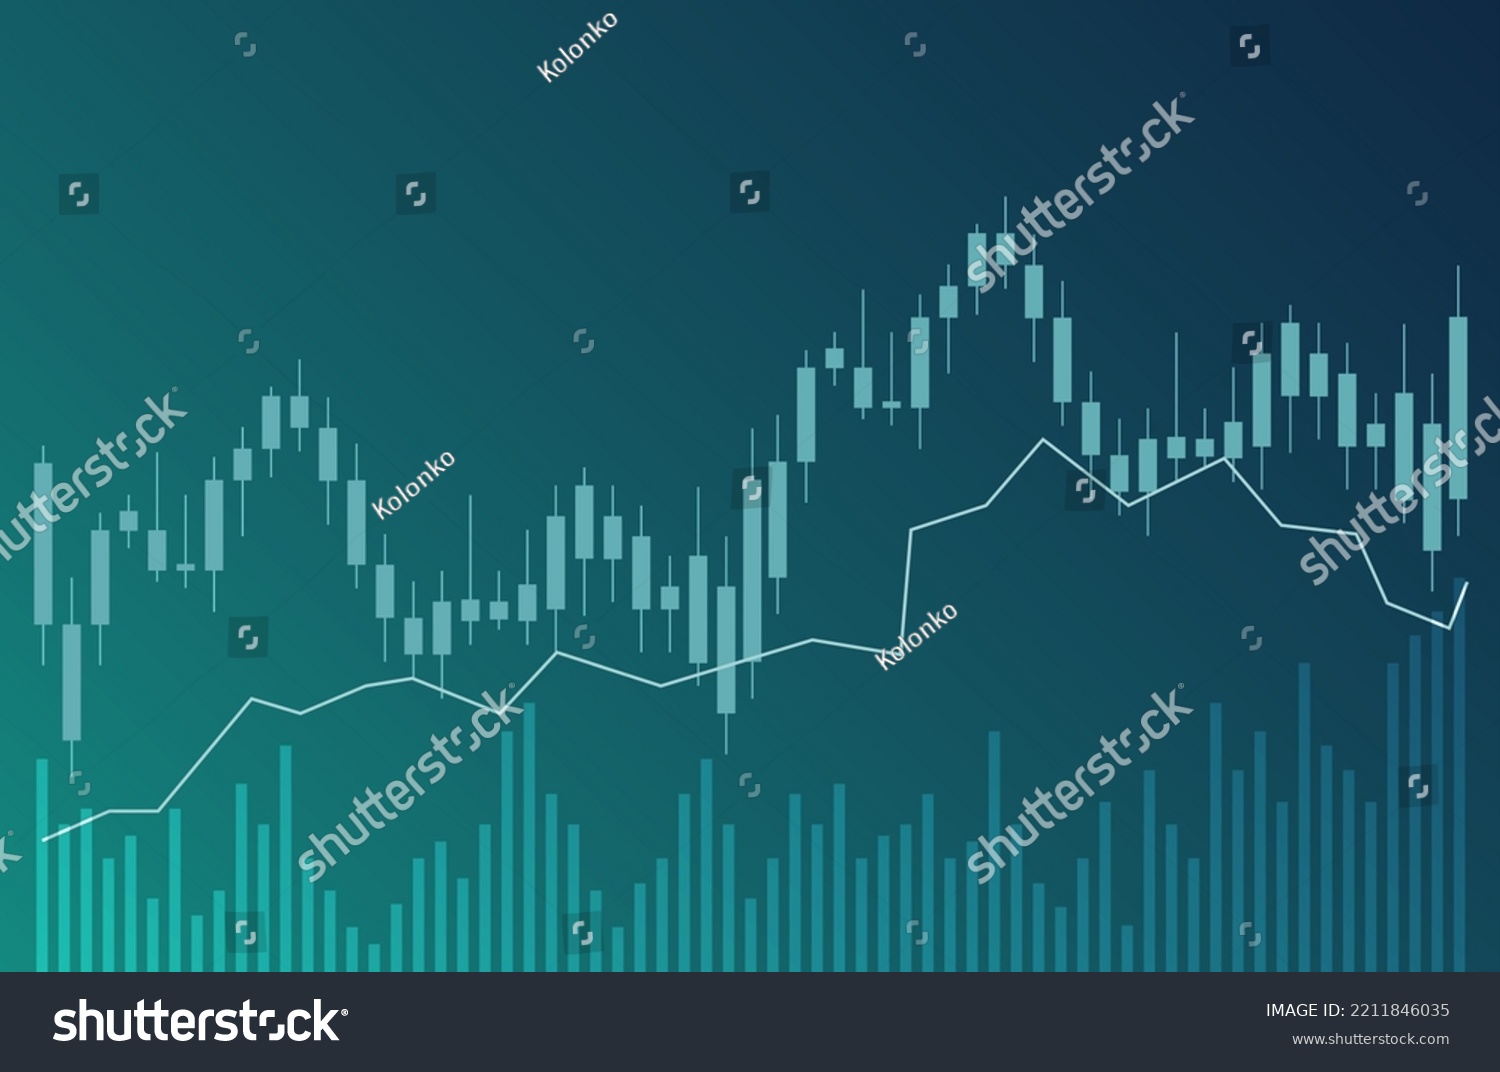 SVG of Chart candle stock graph forex market. Trade candle chart stock finance price exchange background crypto currency svg